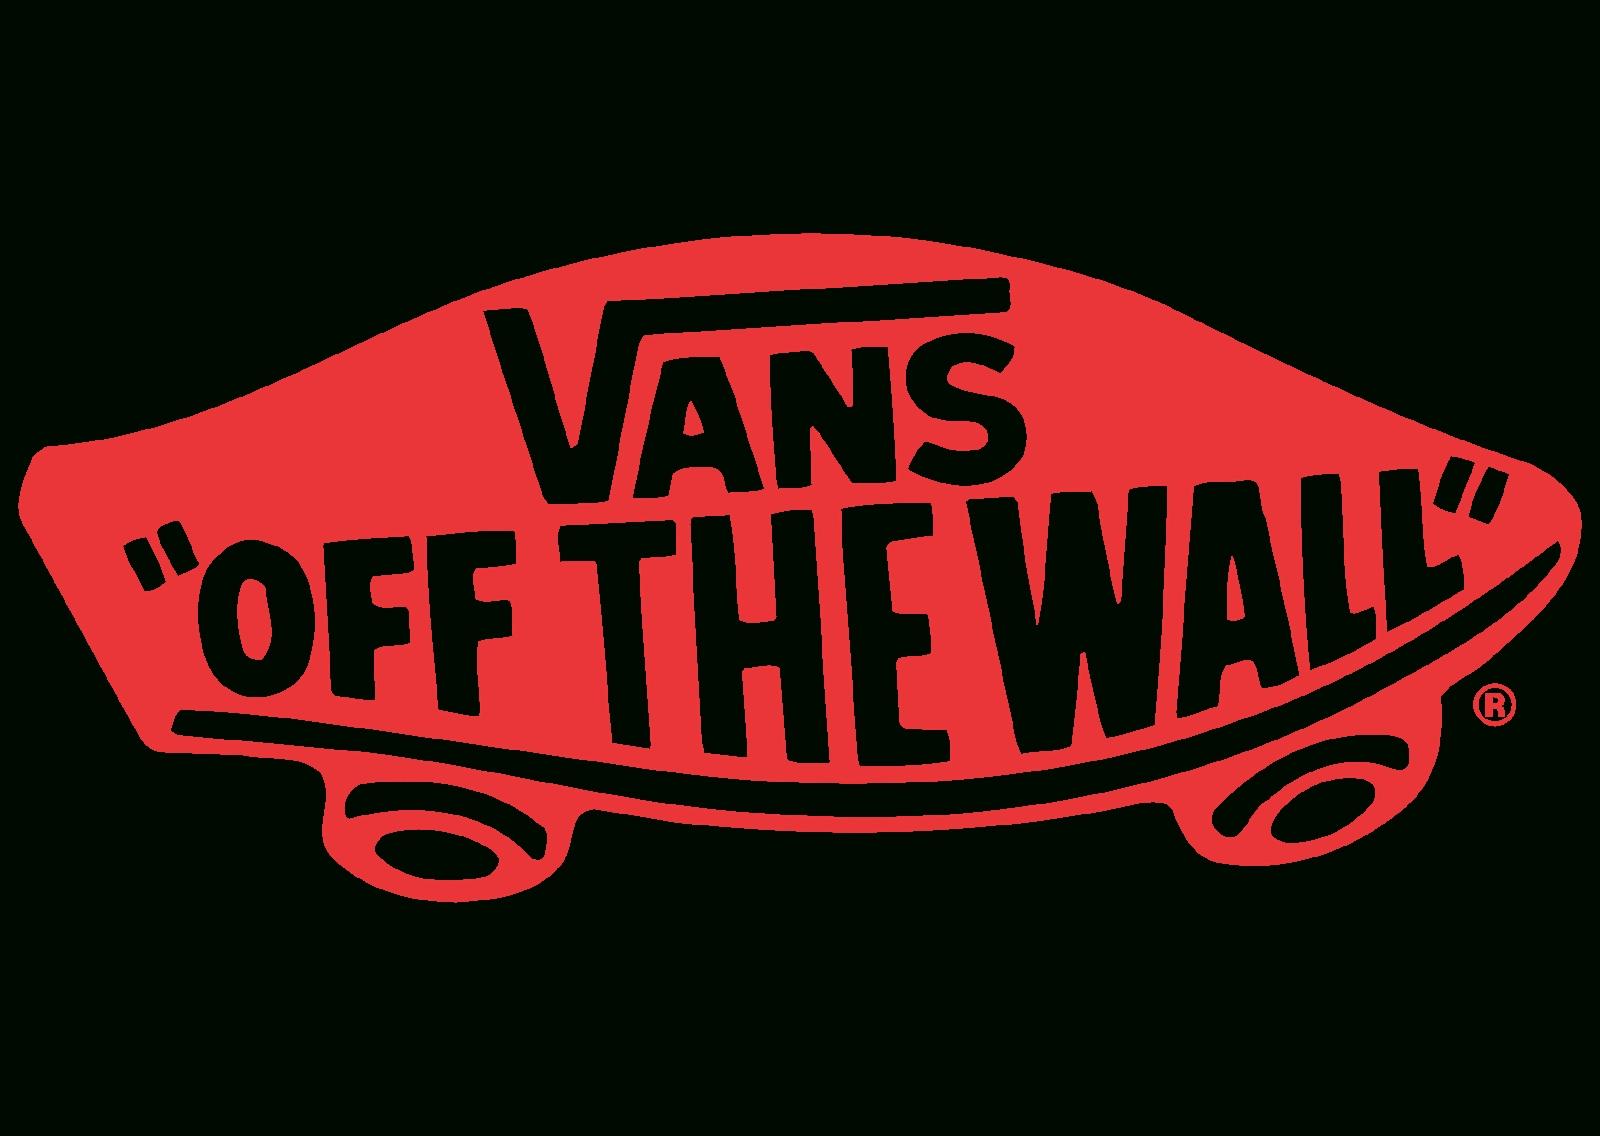 Vans Logo Vector.com. Free for personal use